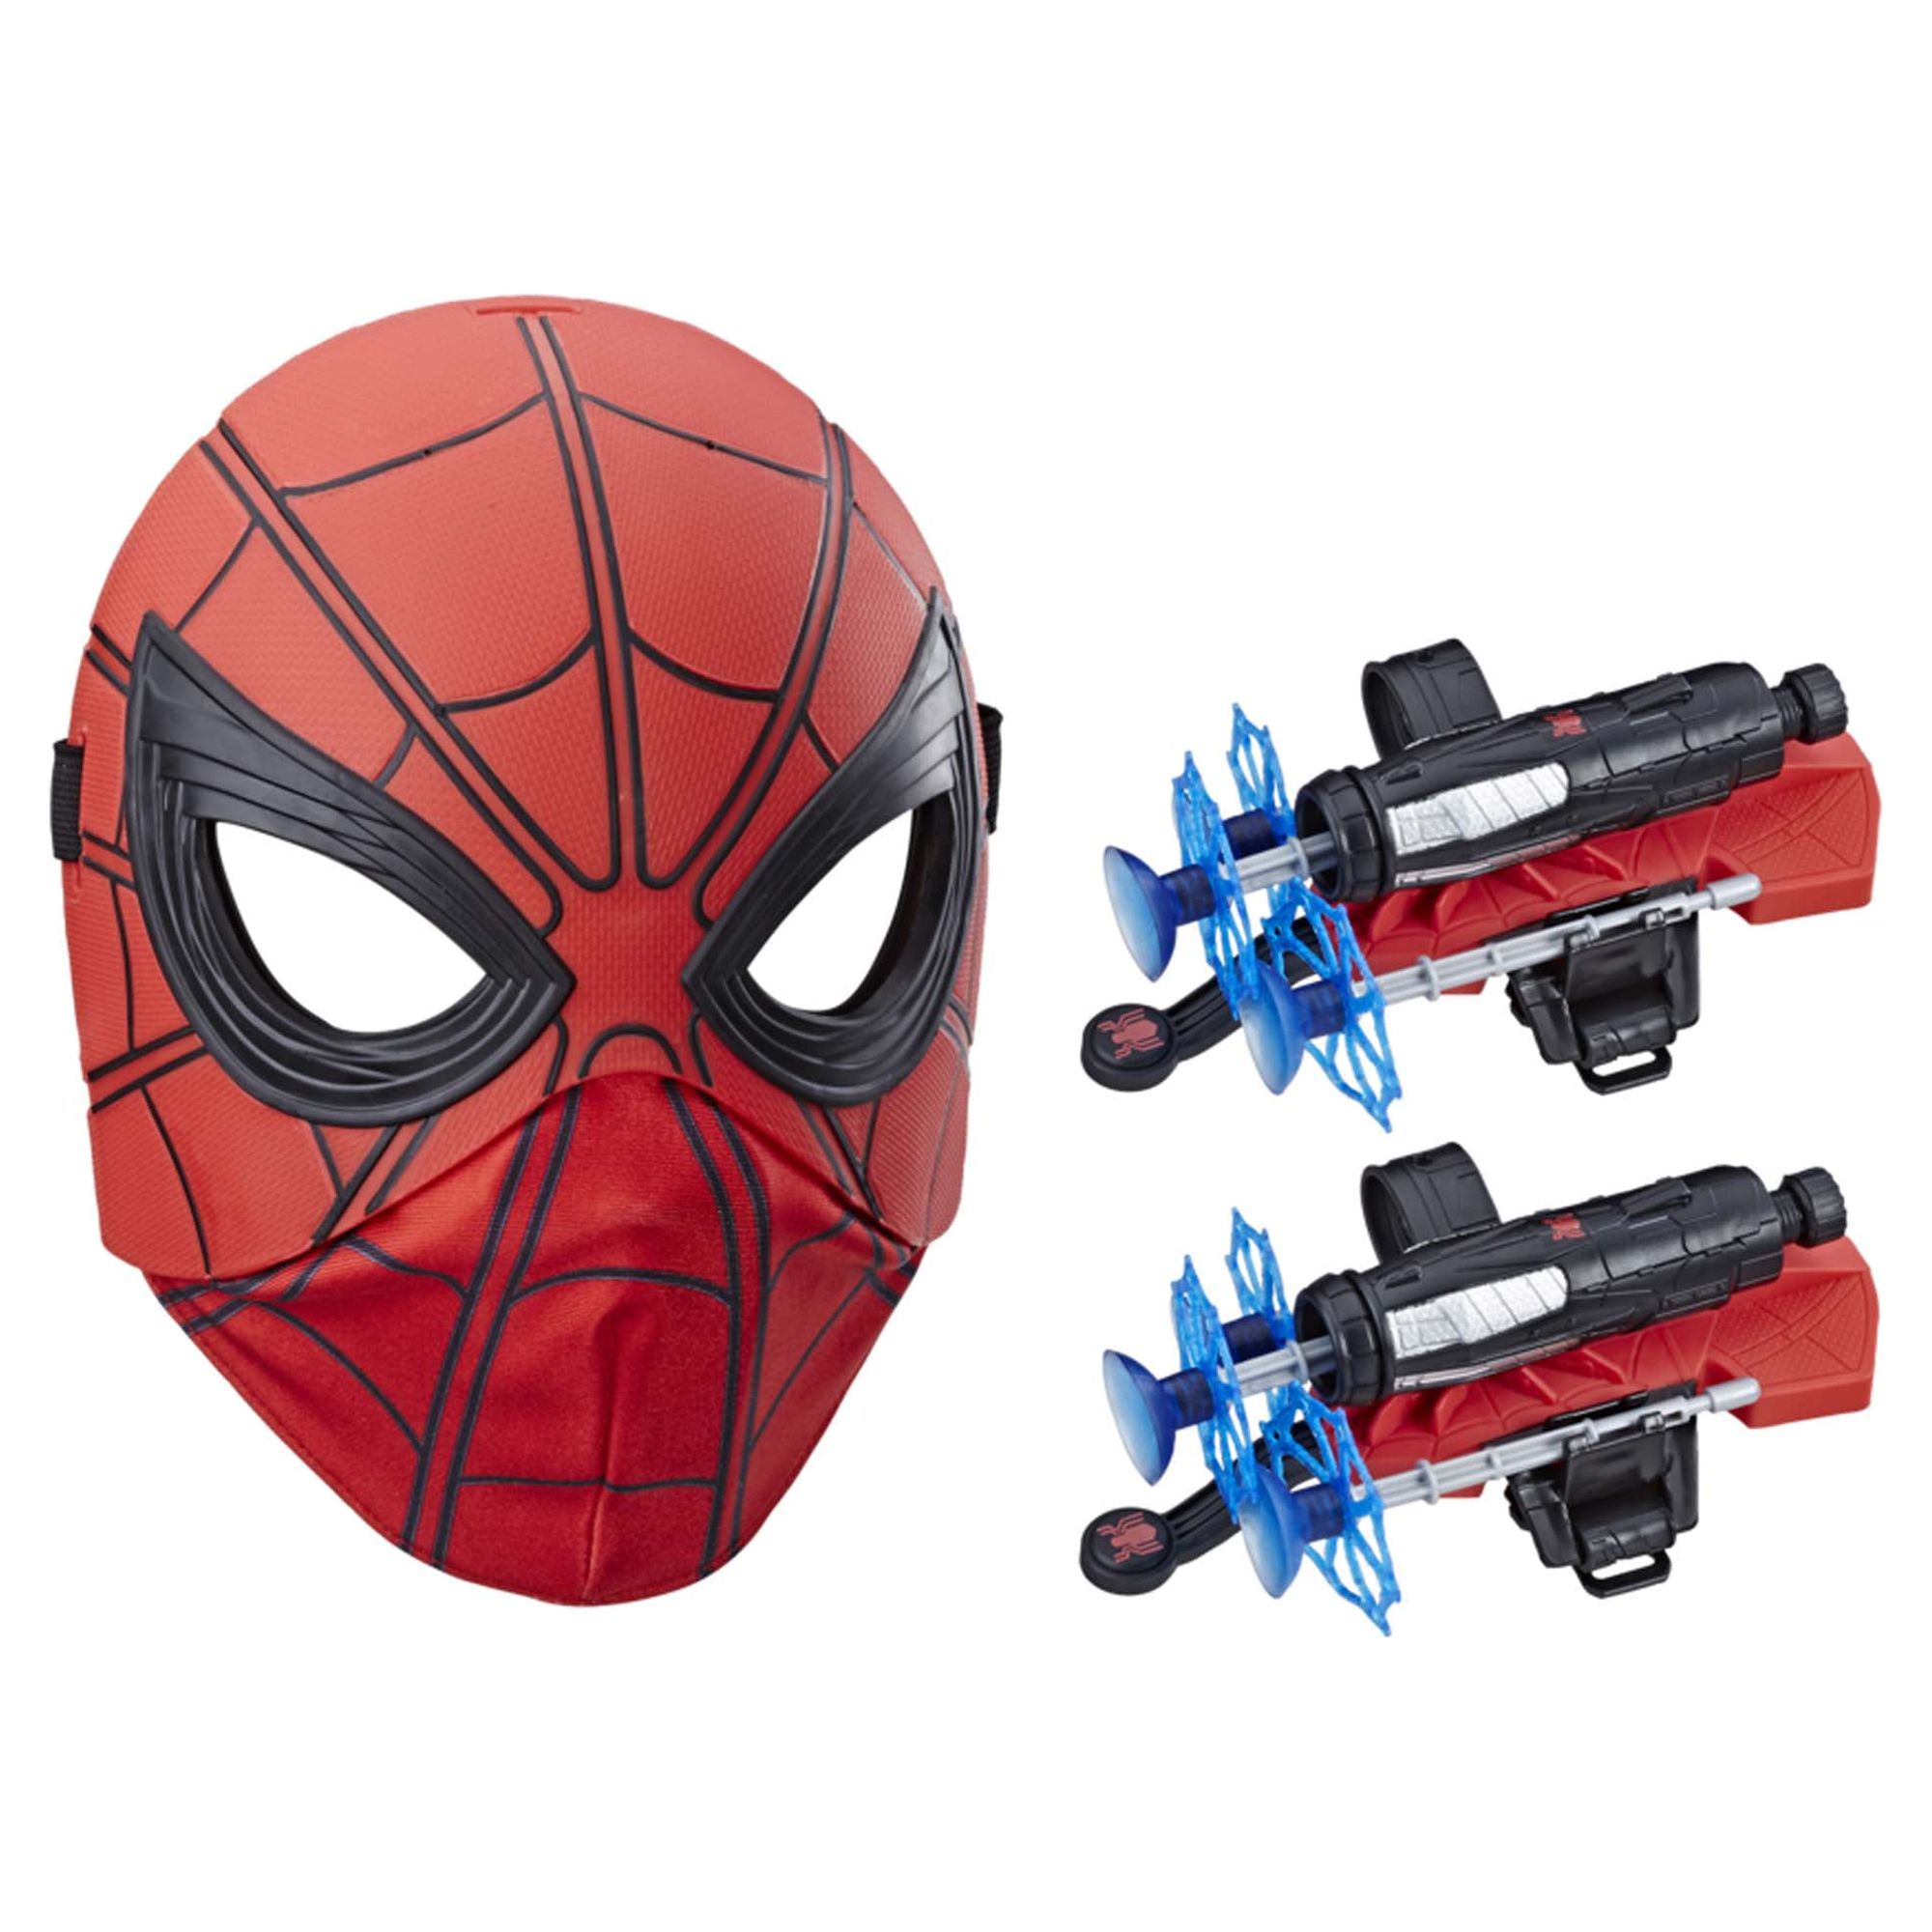 Marvel: Spiderman Far From Home Web Slinging Armor Set Kids Toy Action Figure for Boys and Girls(4”) - image 1 of 11